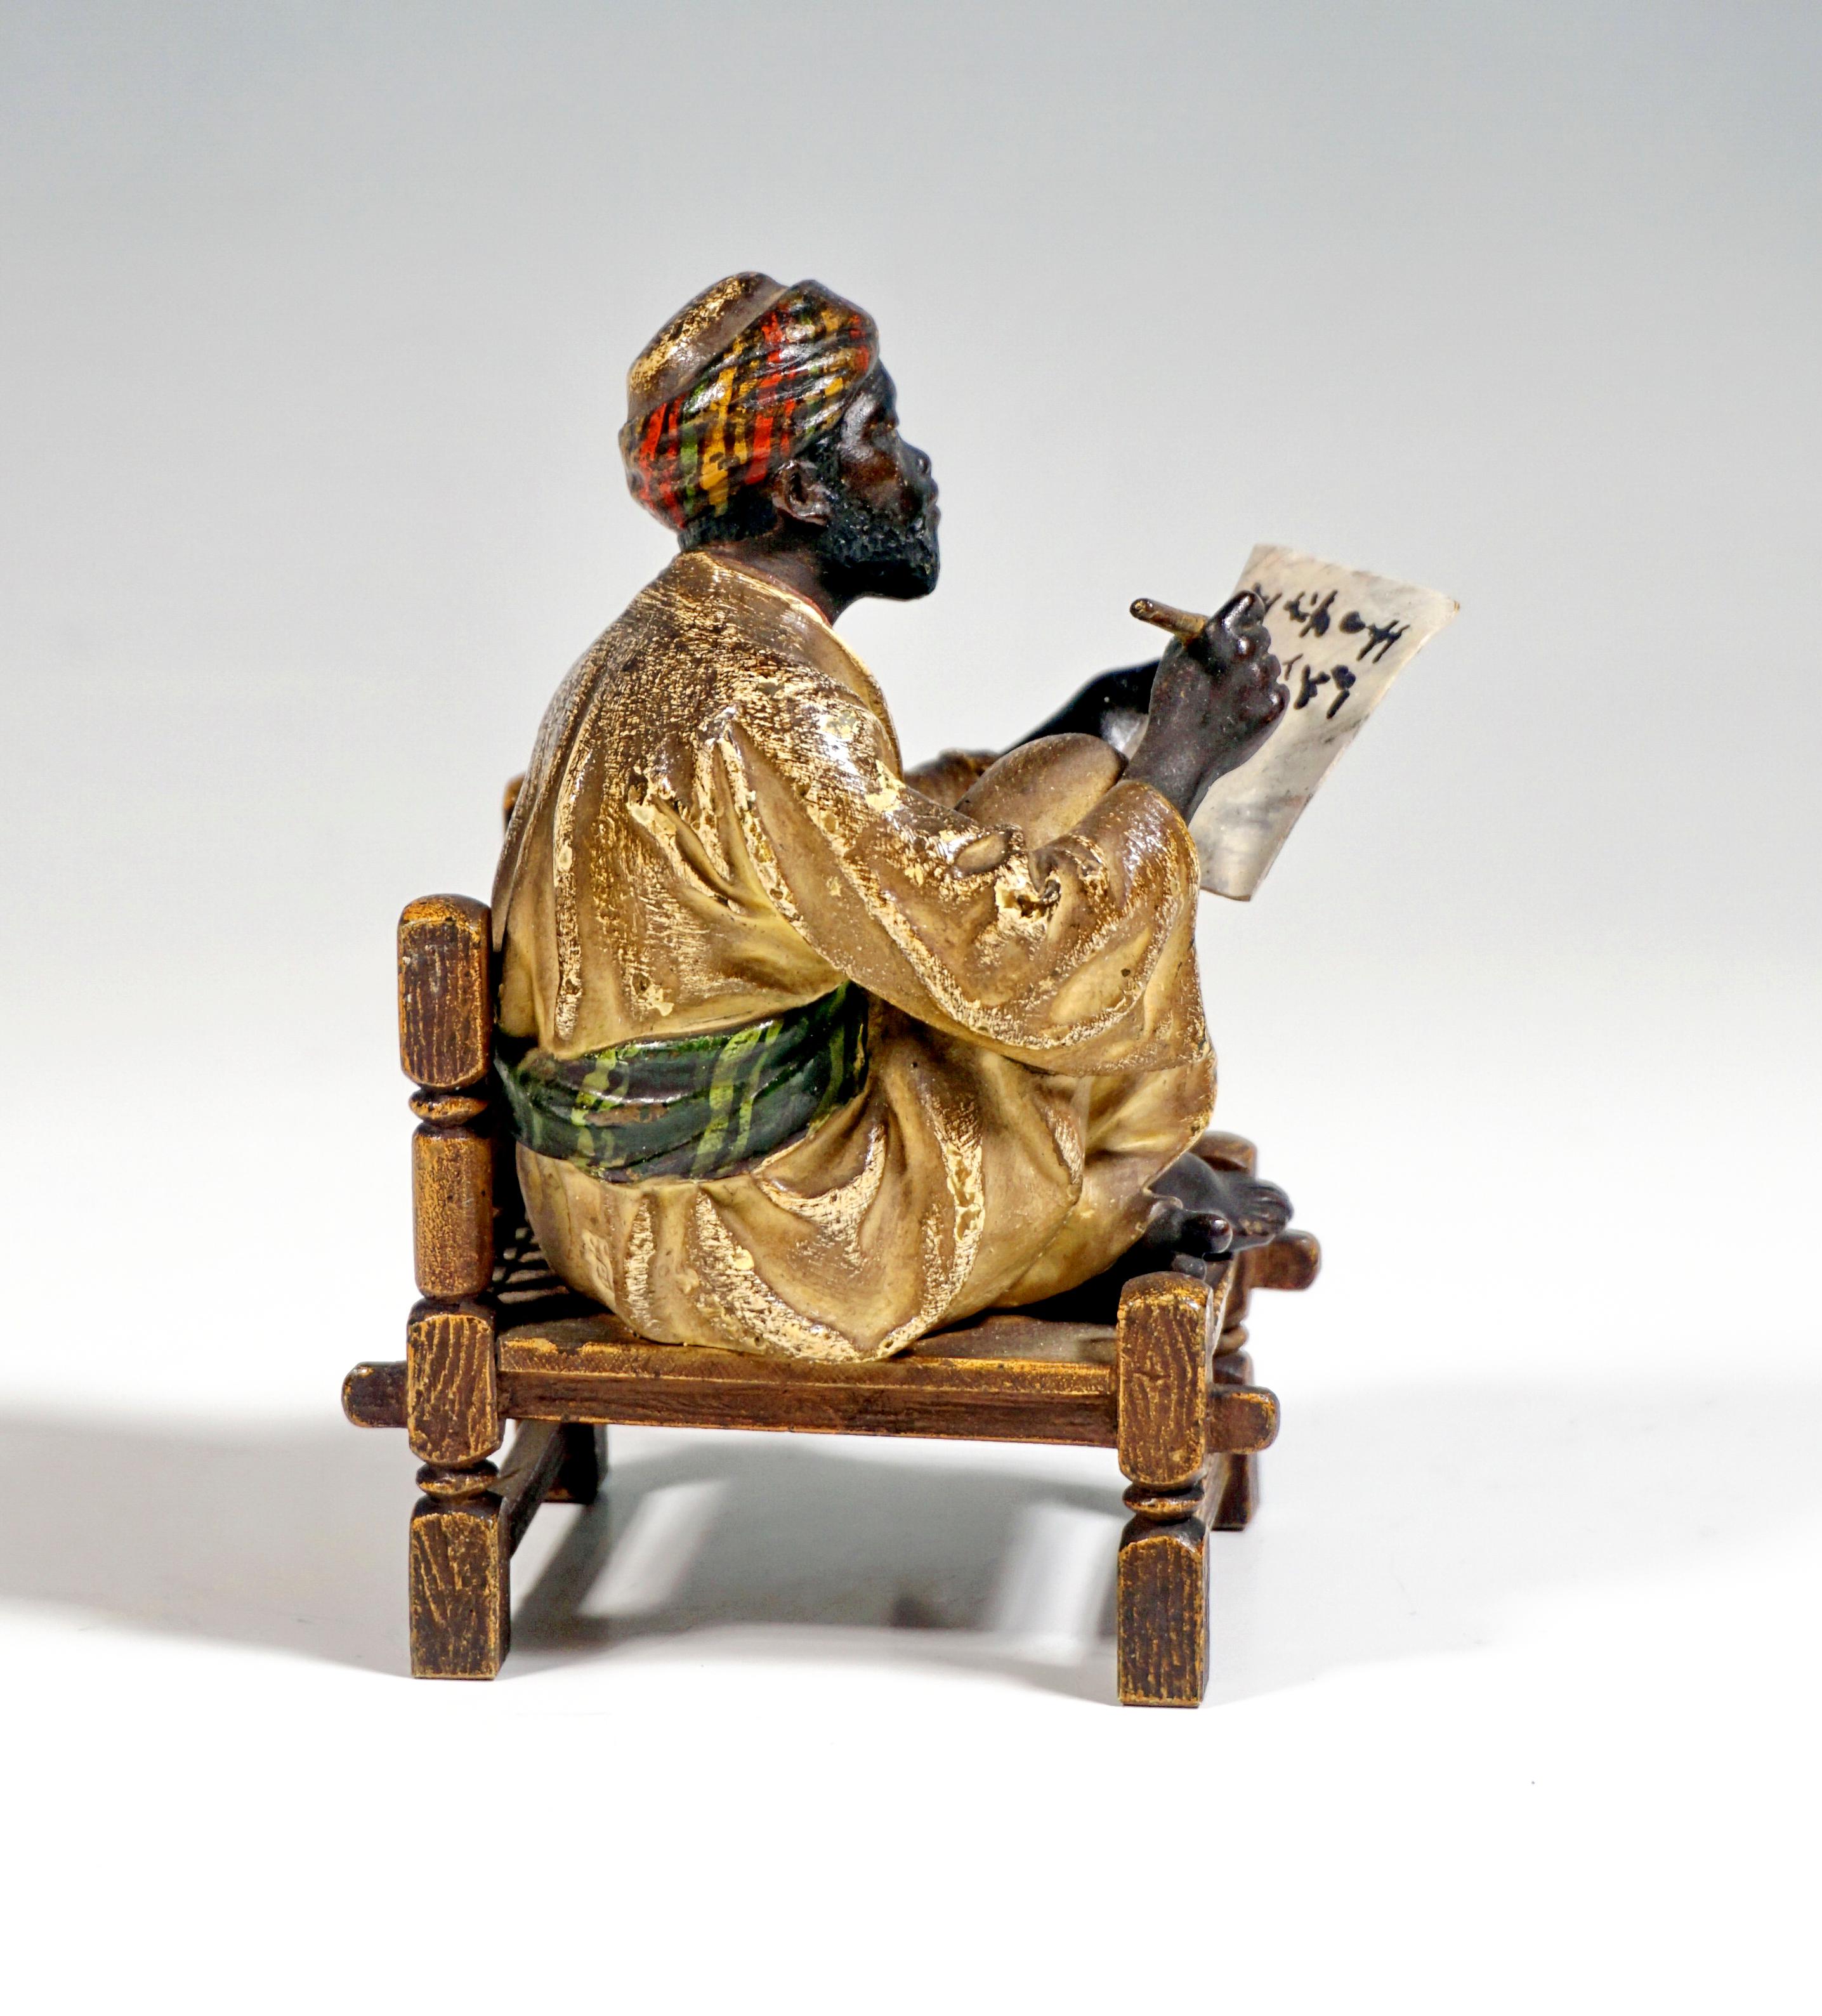 Excellent Piece of Viennese Bronze Art around 1900:
A bearded oriental in a long light robe and turban sits cross-legged on a wooden bench and writes on a sheet of paper he holds in his left hand.
The figure is decorated in color, Bergmann signet